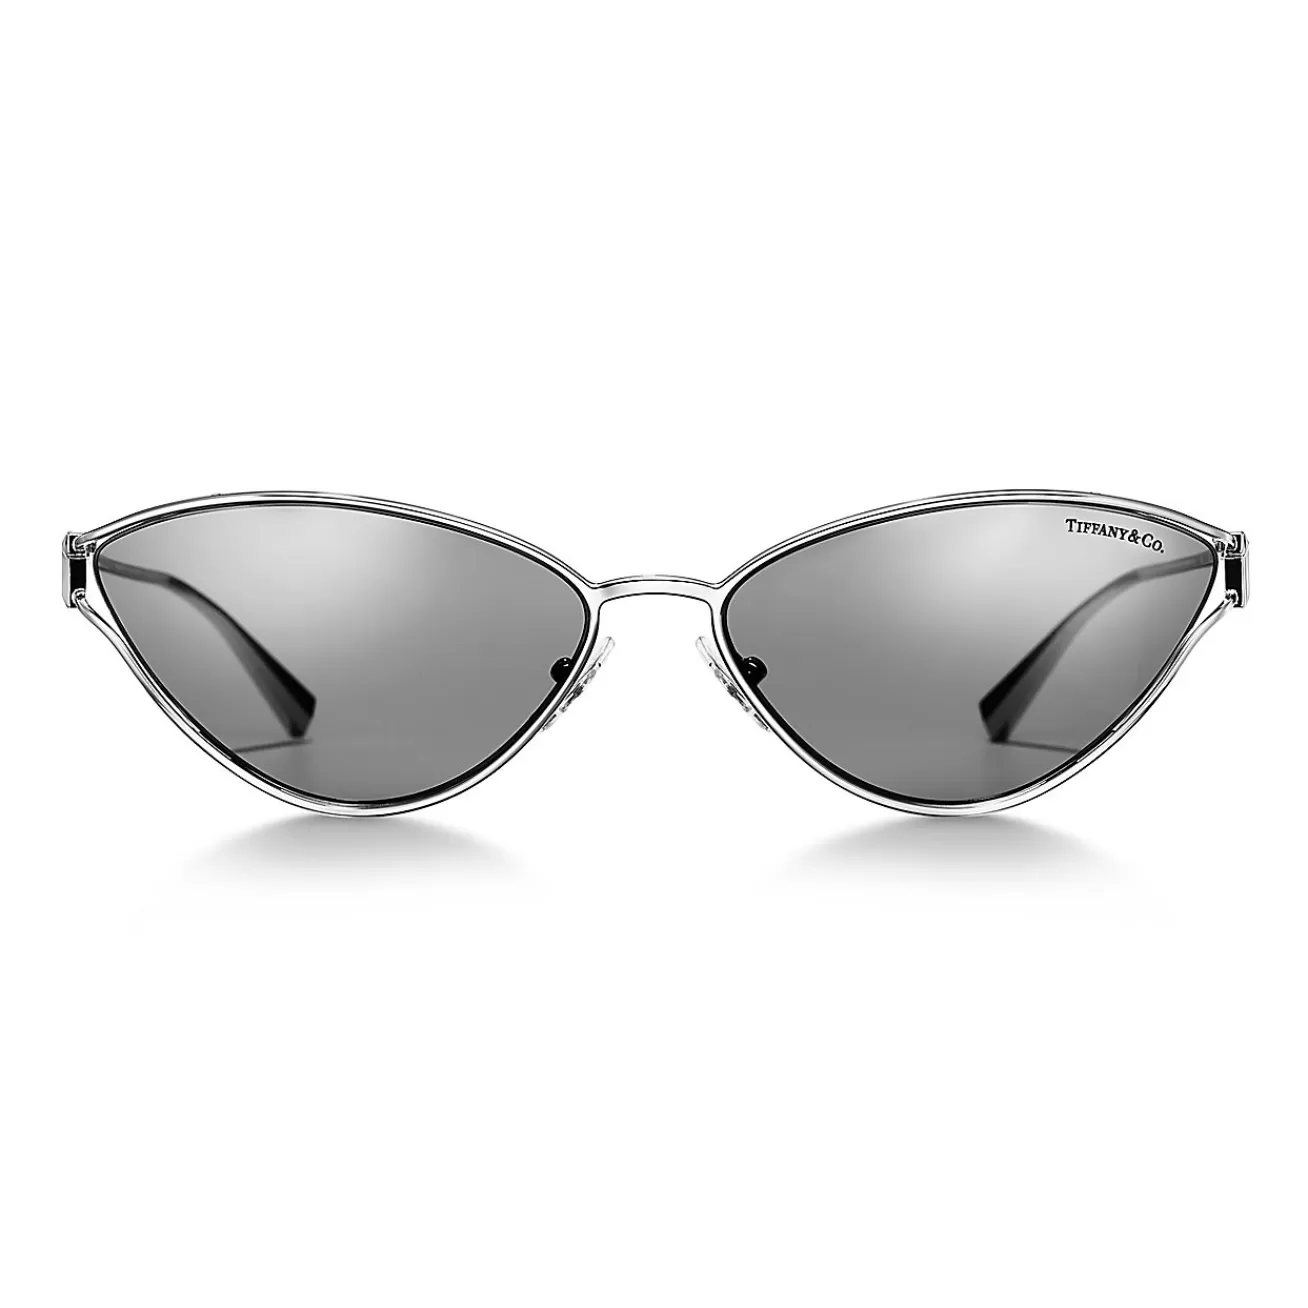 Tiffany & Co. Tiffany T Sunglasses in Silver-colored Metal with Light Gray Mirrored Lenses | ^Women Tiffany T | Sunglasses